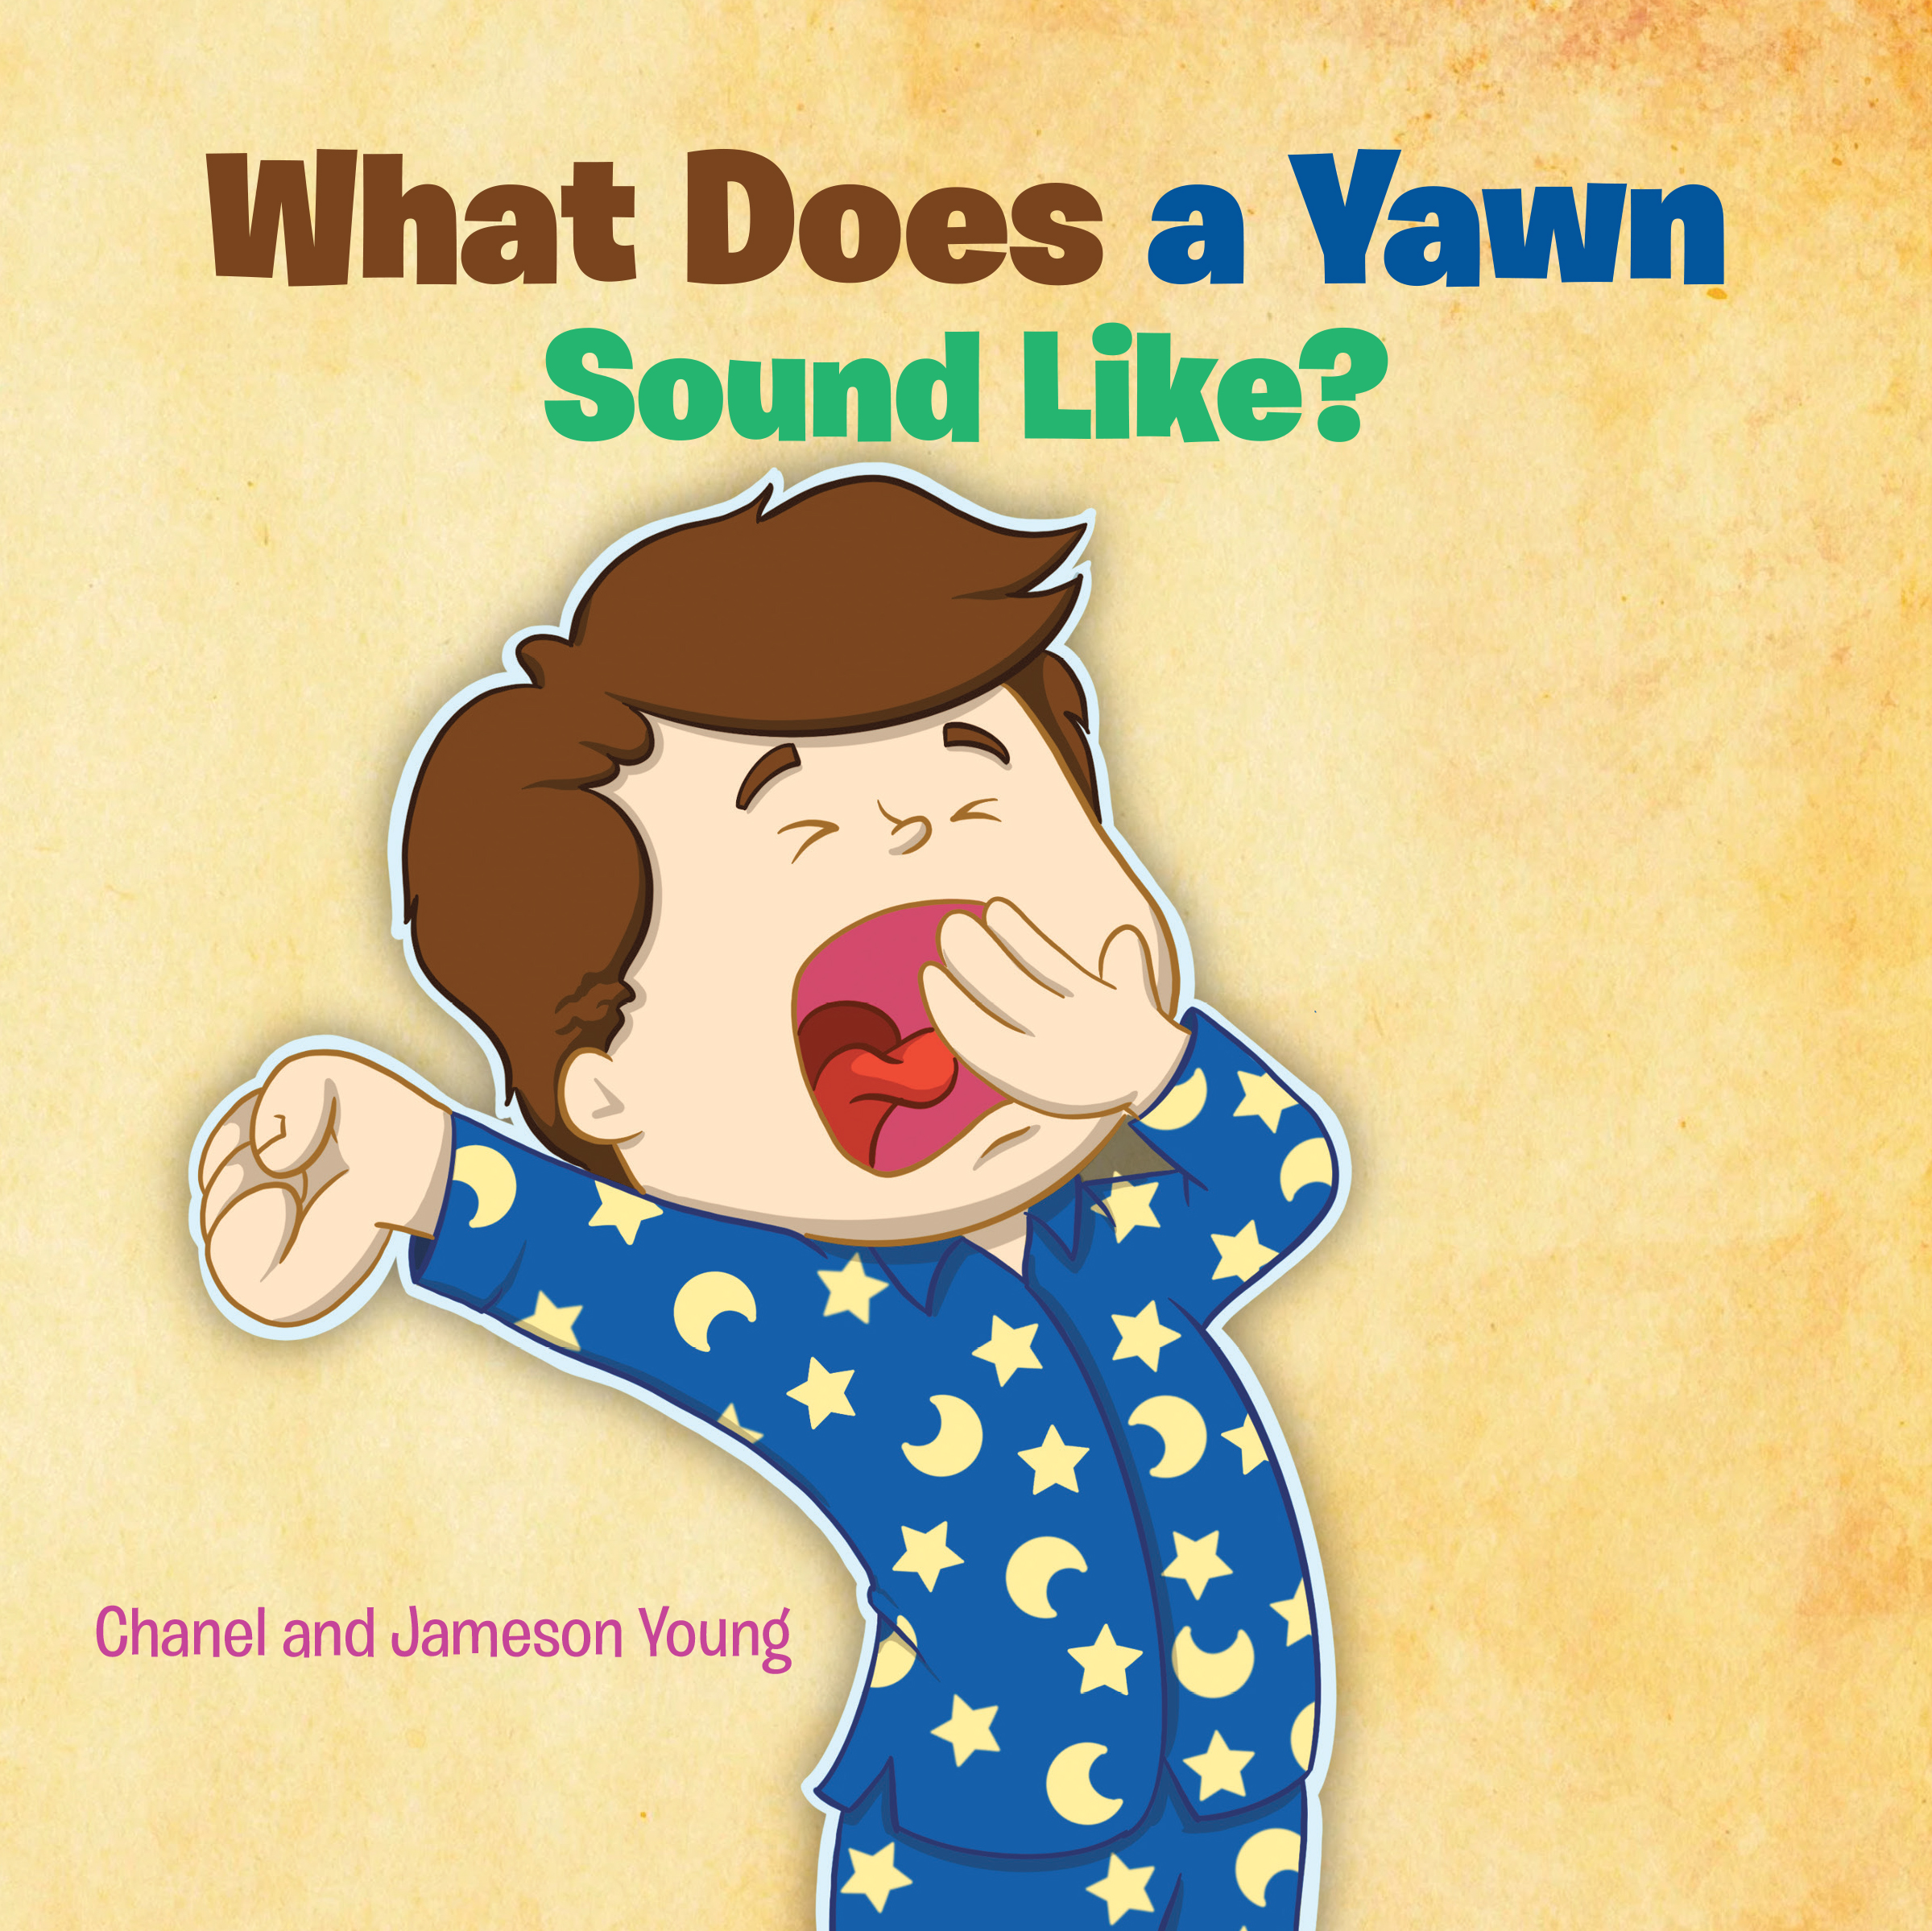 Chanel and Jameson Young’s Newly Released "What Does a Yawn Sound Like?" is a Delightful Interactive Adventure for Young Readers